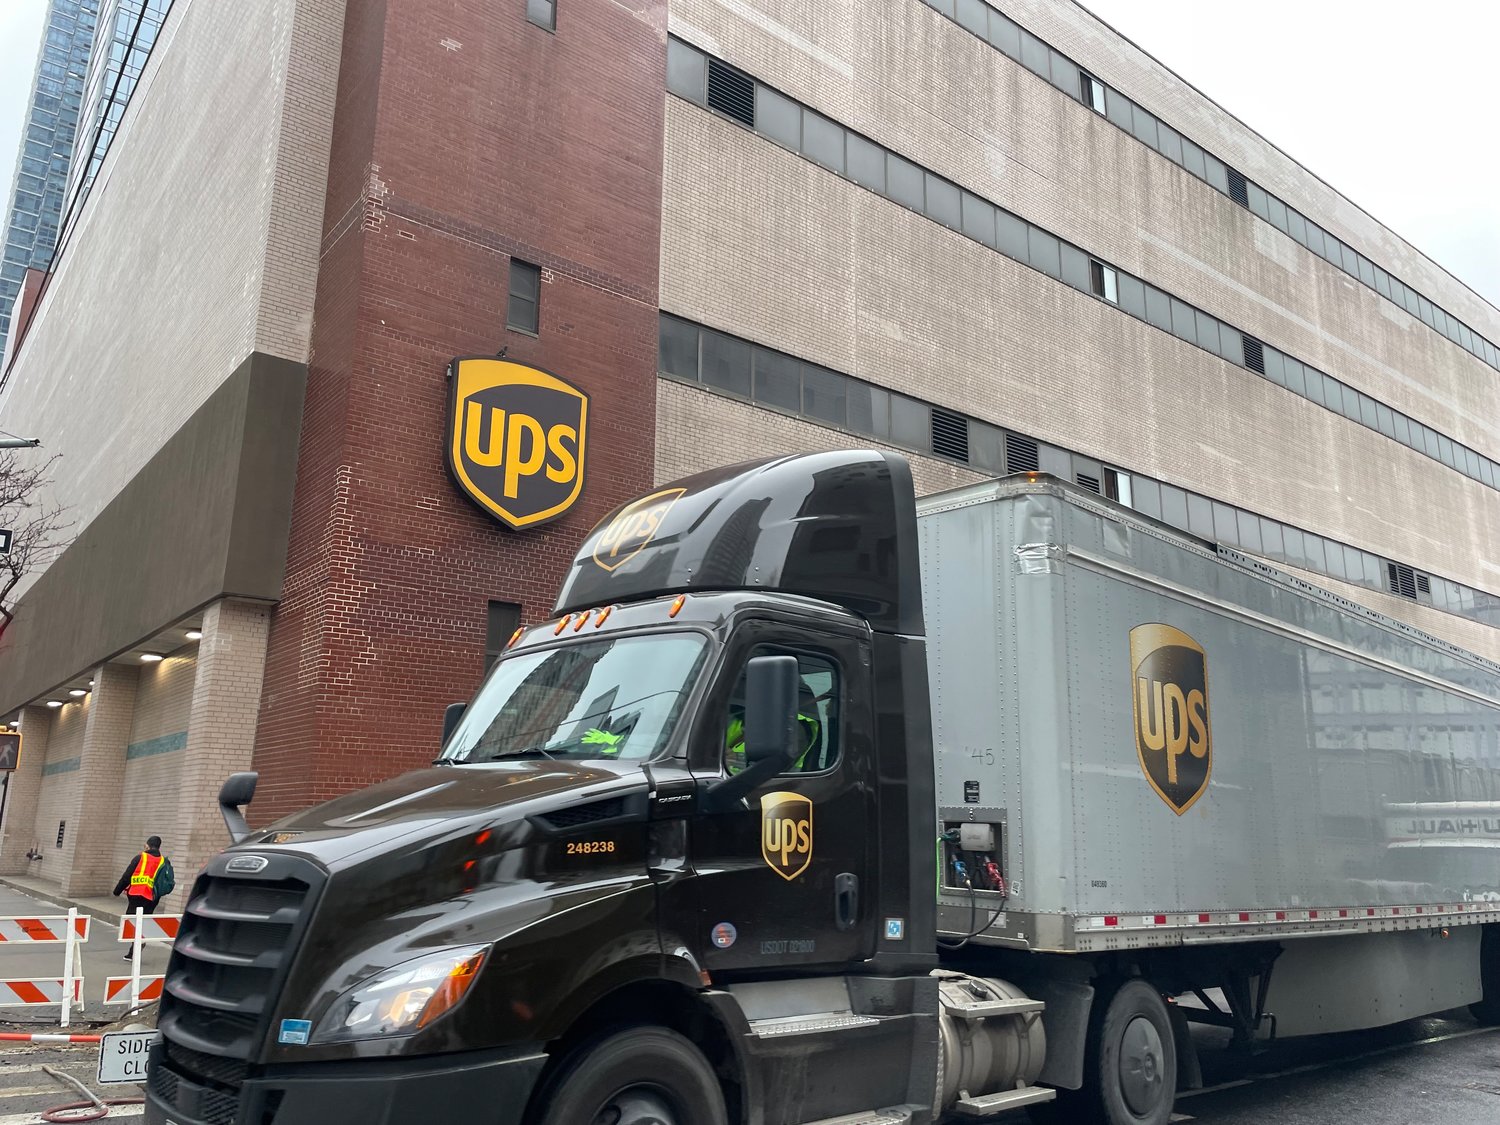 A manager and 16 supervisors at the UPS Customer Service Center on Manhattan’s far West Side were fired after it was discovered that they were partying during their shifts, union officials said.